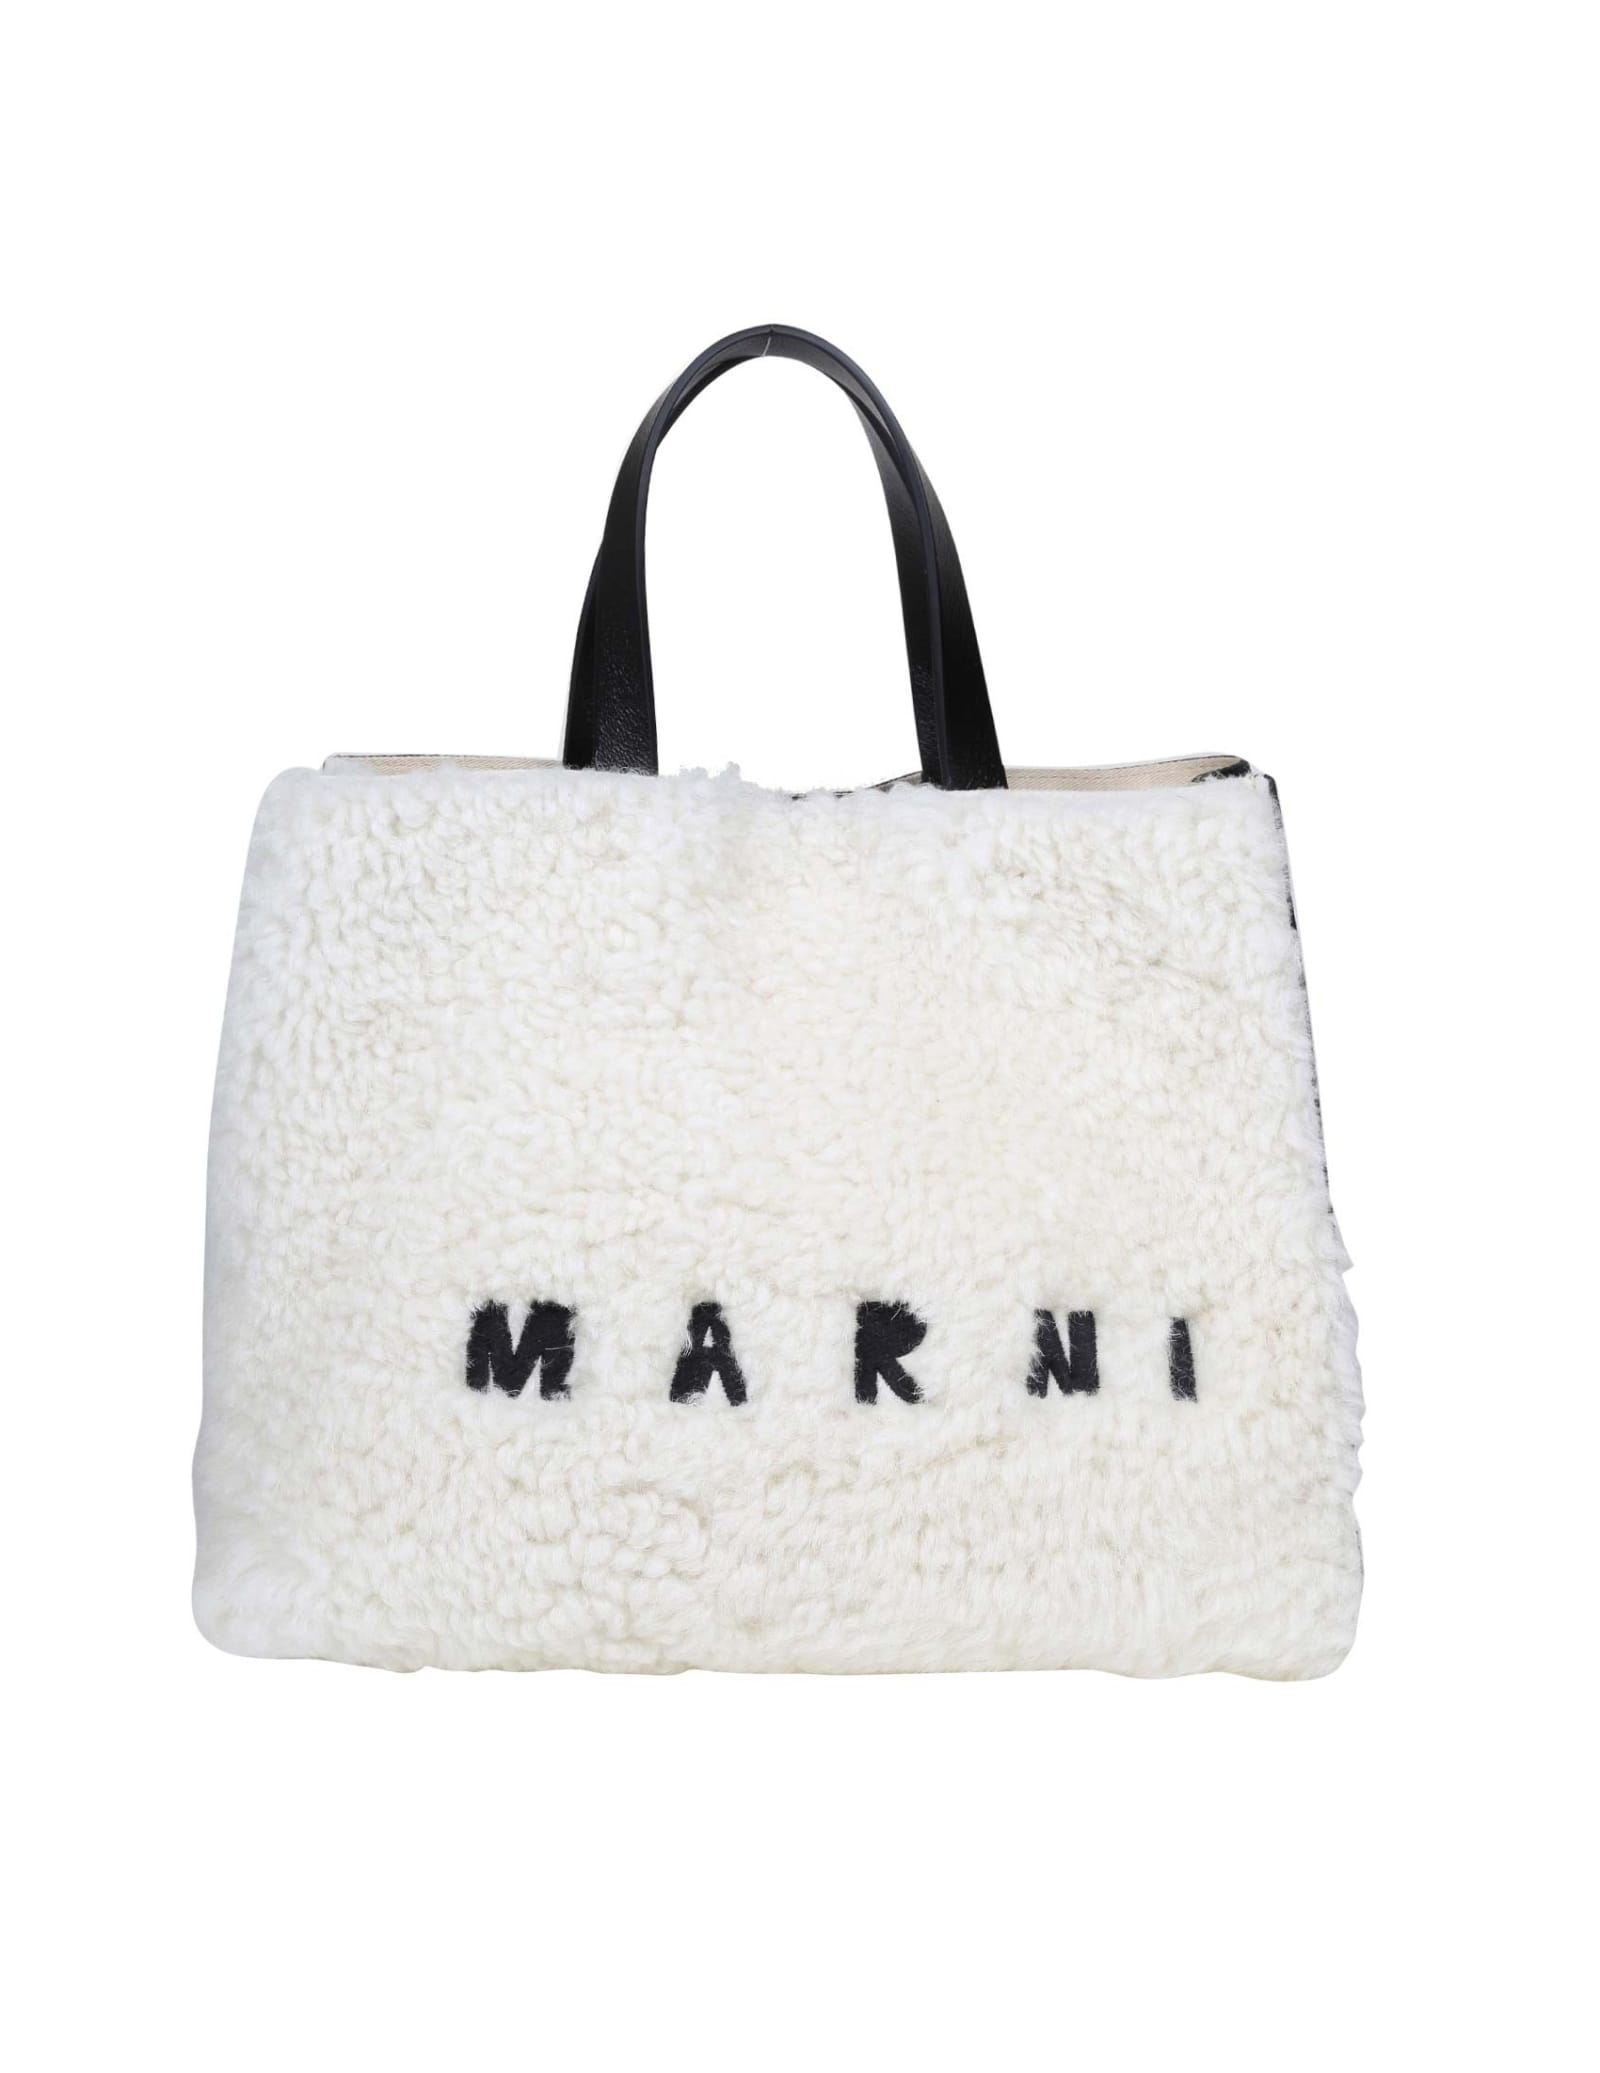 MARNI TOTE BAG IN SHEARLING AND LEATHER